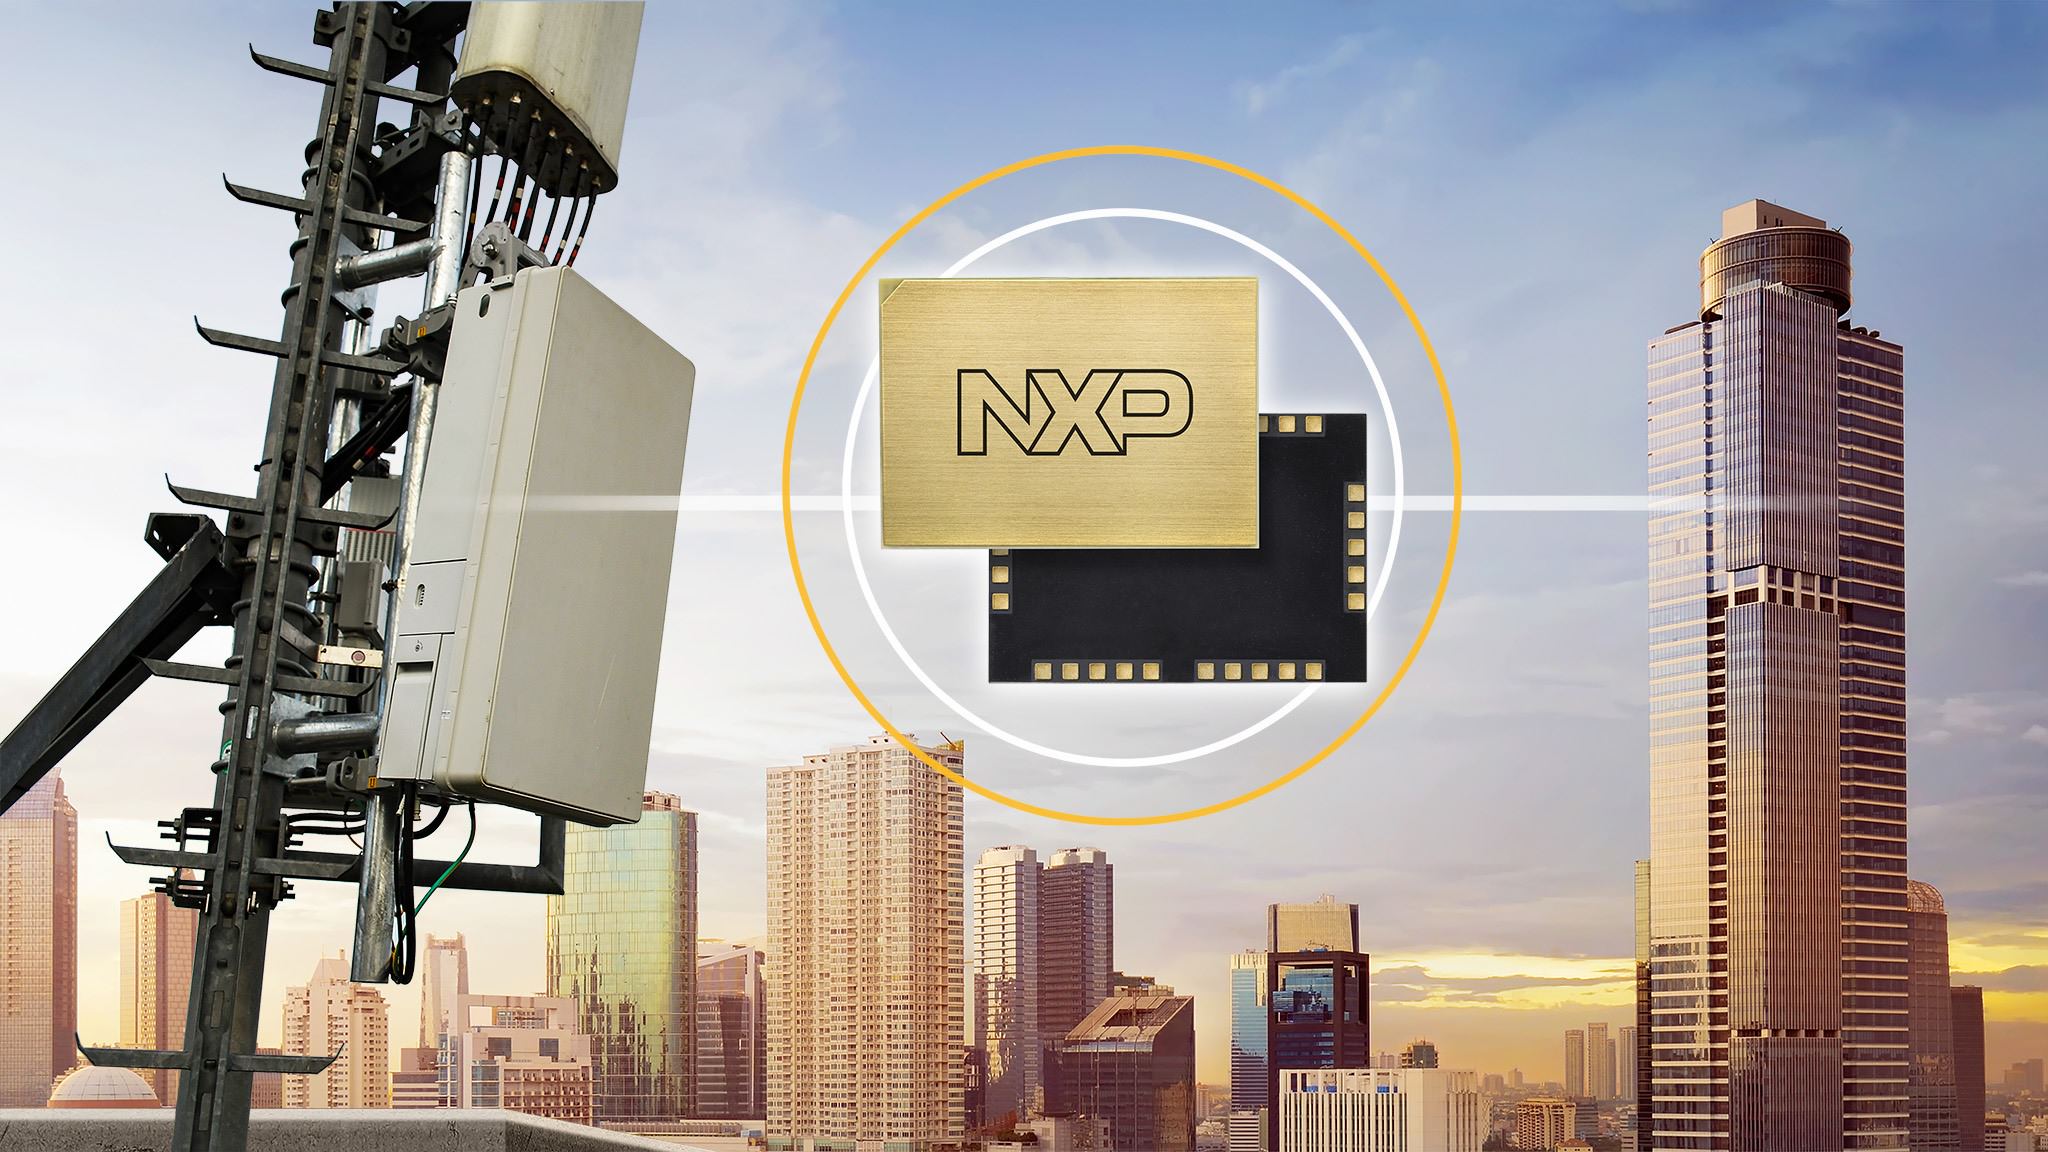 5G Radios Shrink With NXP's New Top-Side Cooling For RF Power